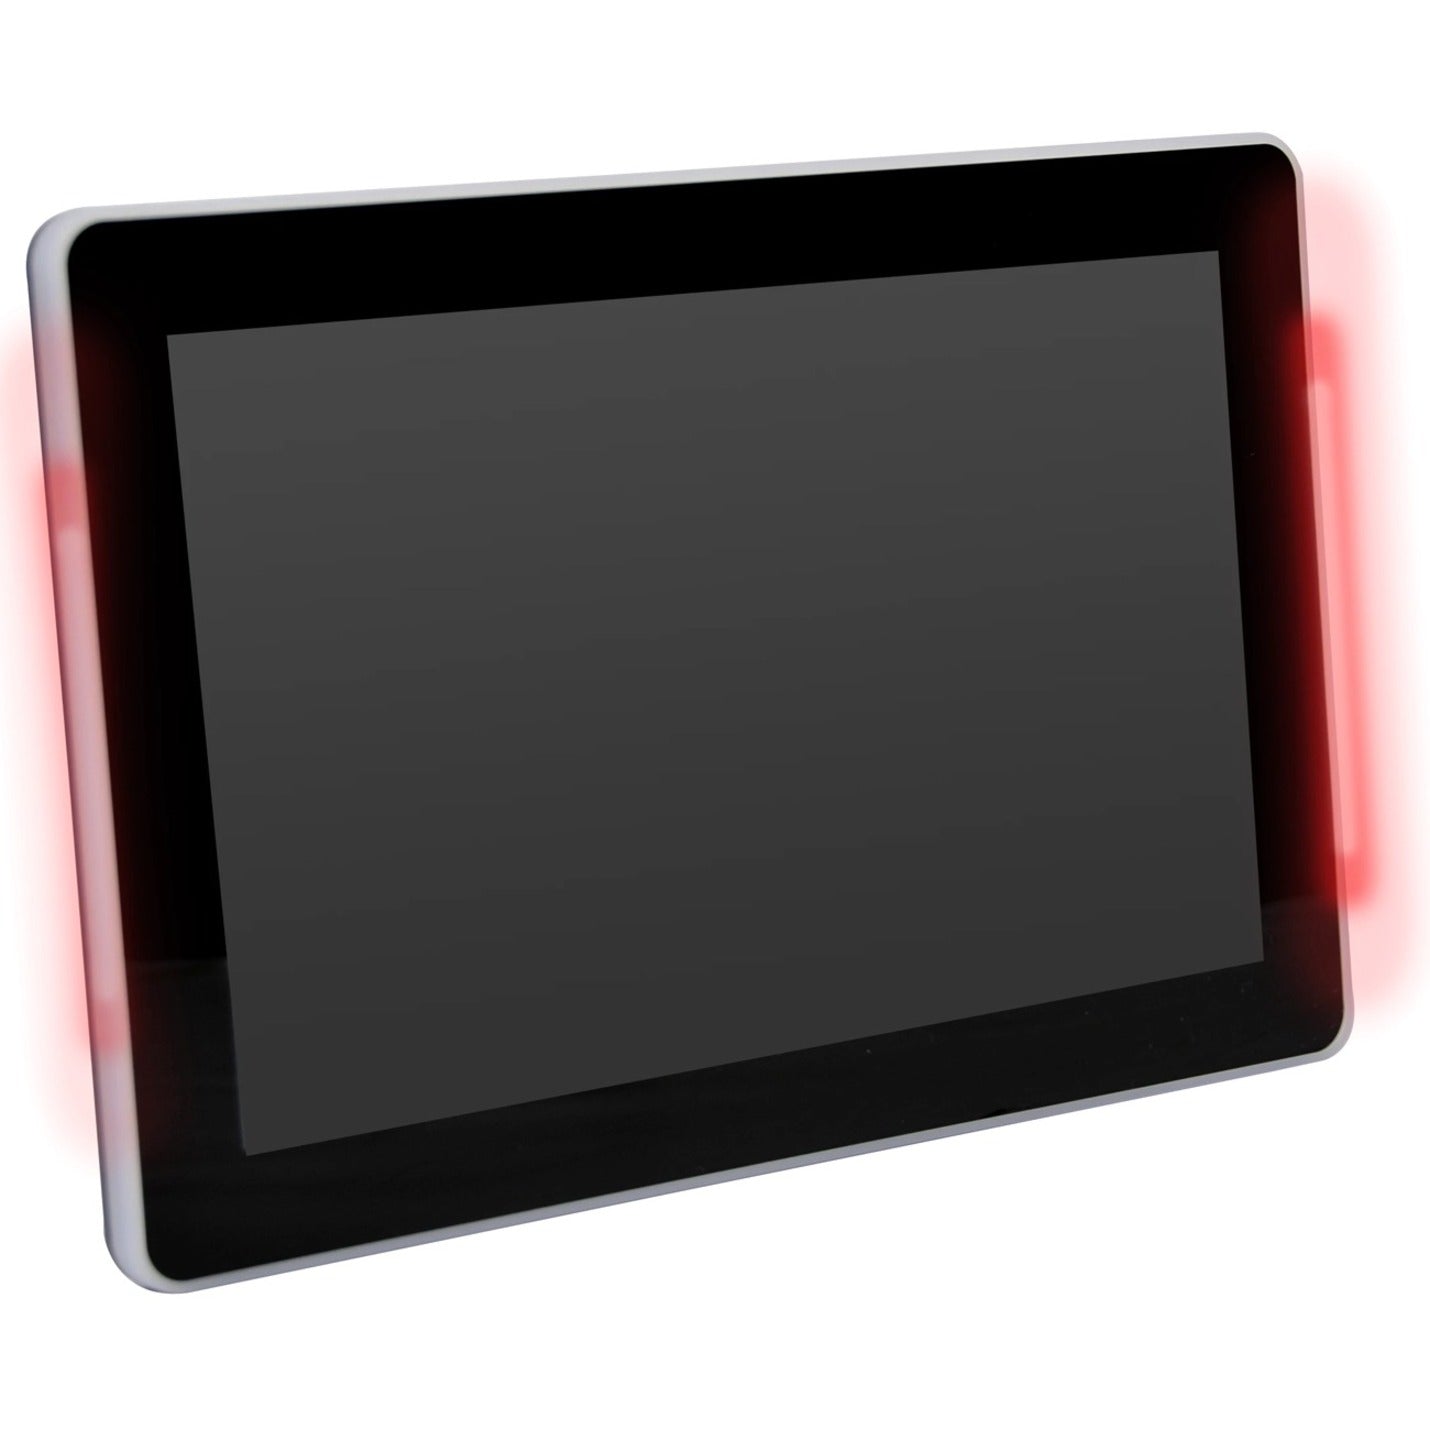 Mimo Monitors MBS-1080C-POE-L Vue Digital Signage Display, 10.1" Touchscreen, 1280 x 800, LED Backlight, 350 Nit